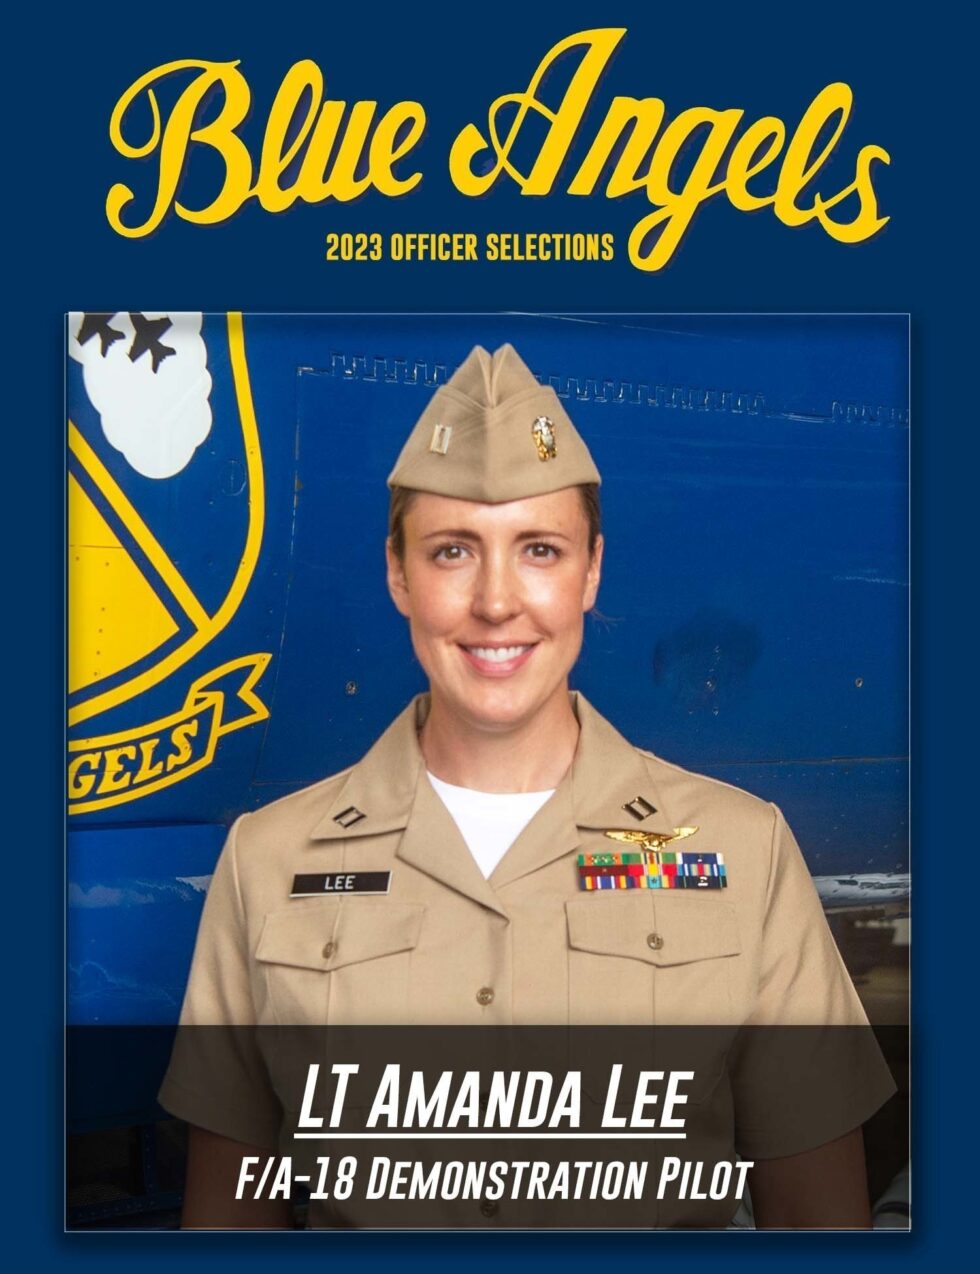 Blue Angels announce their first female demonstrative pilot